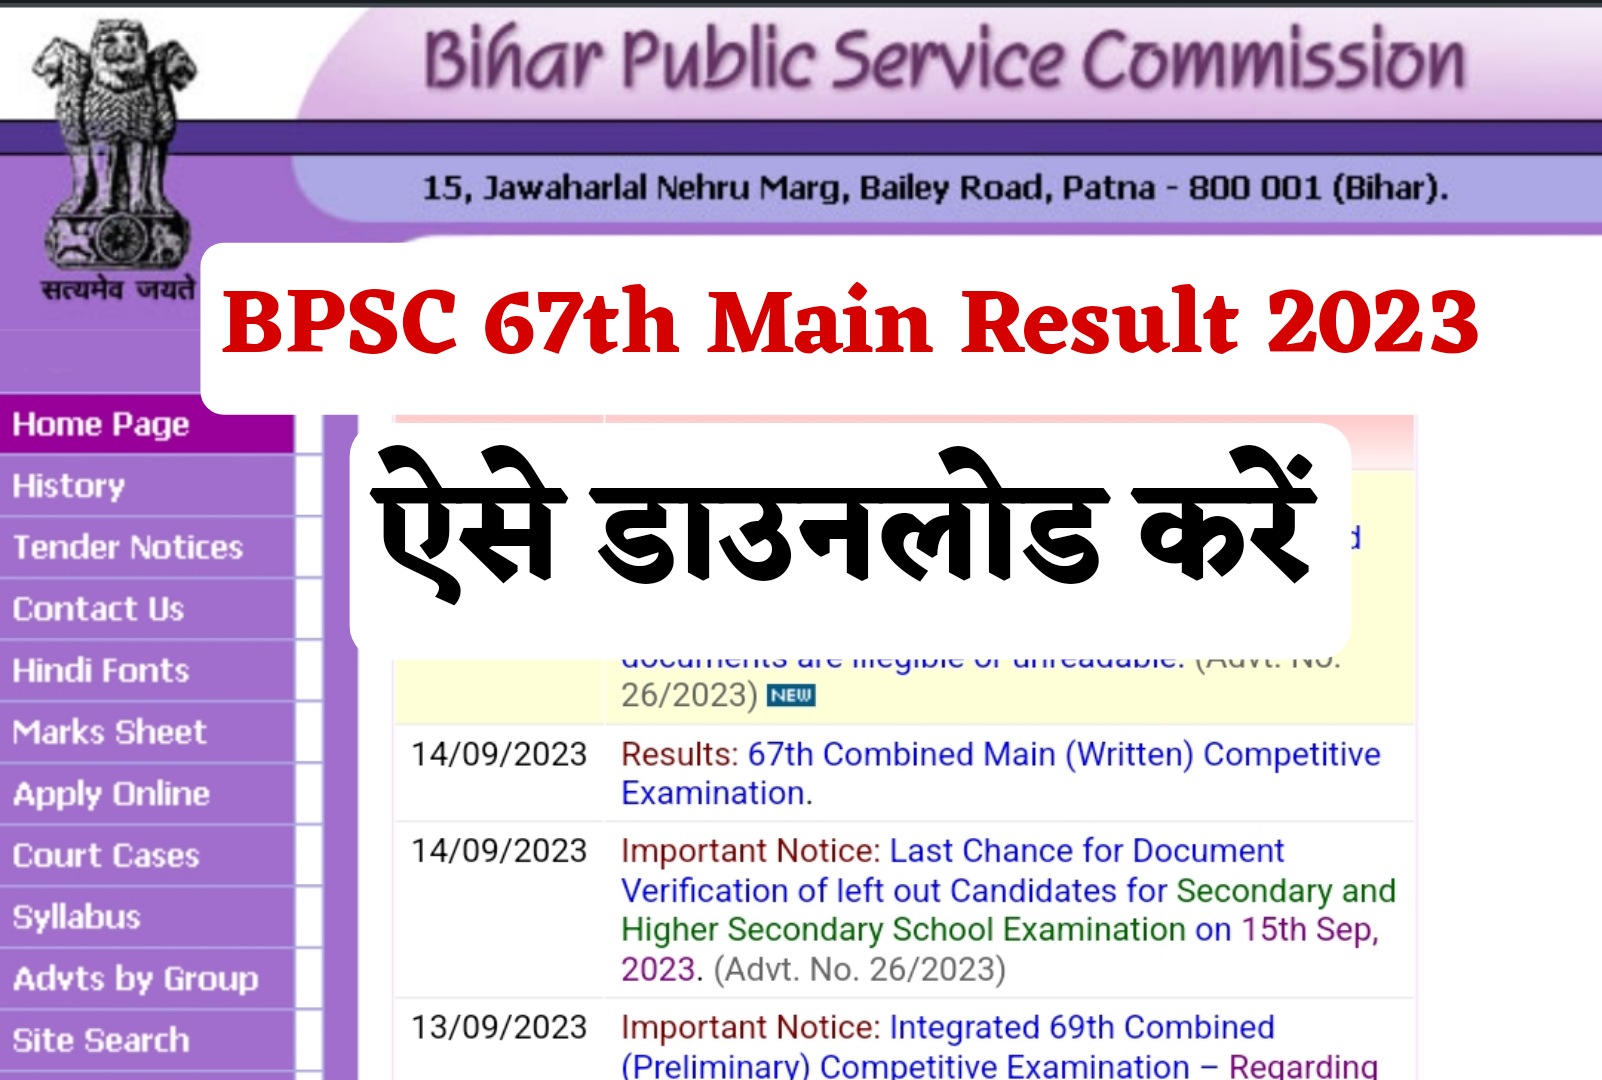 BPSC 67th Main Result 2023